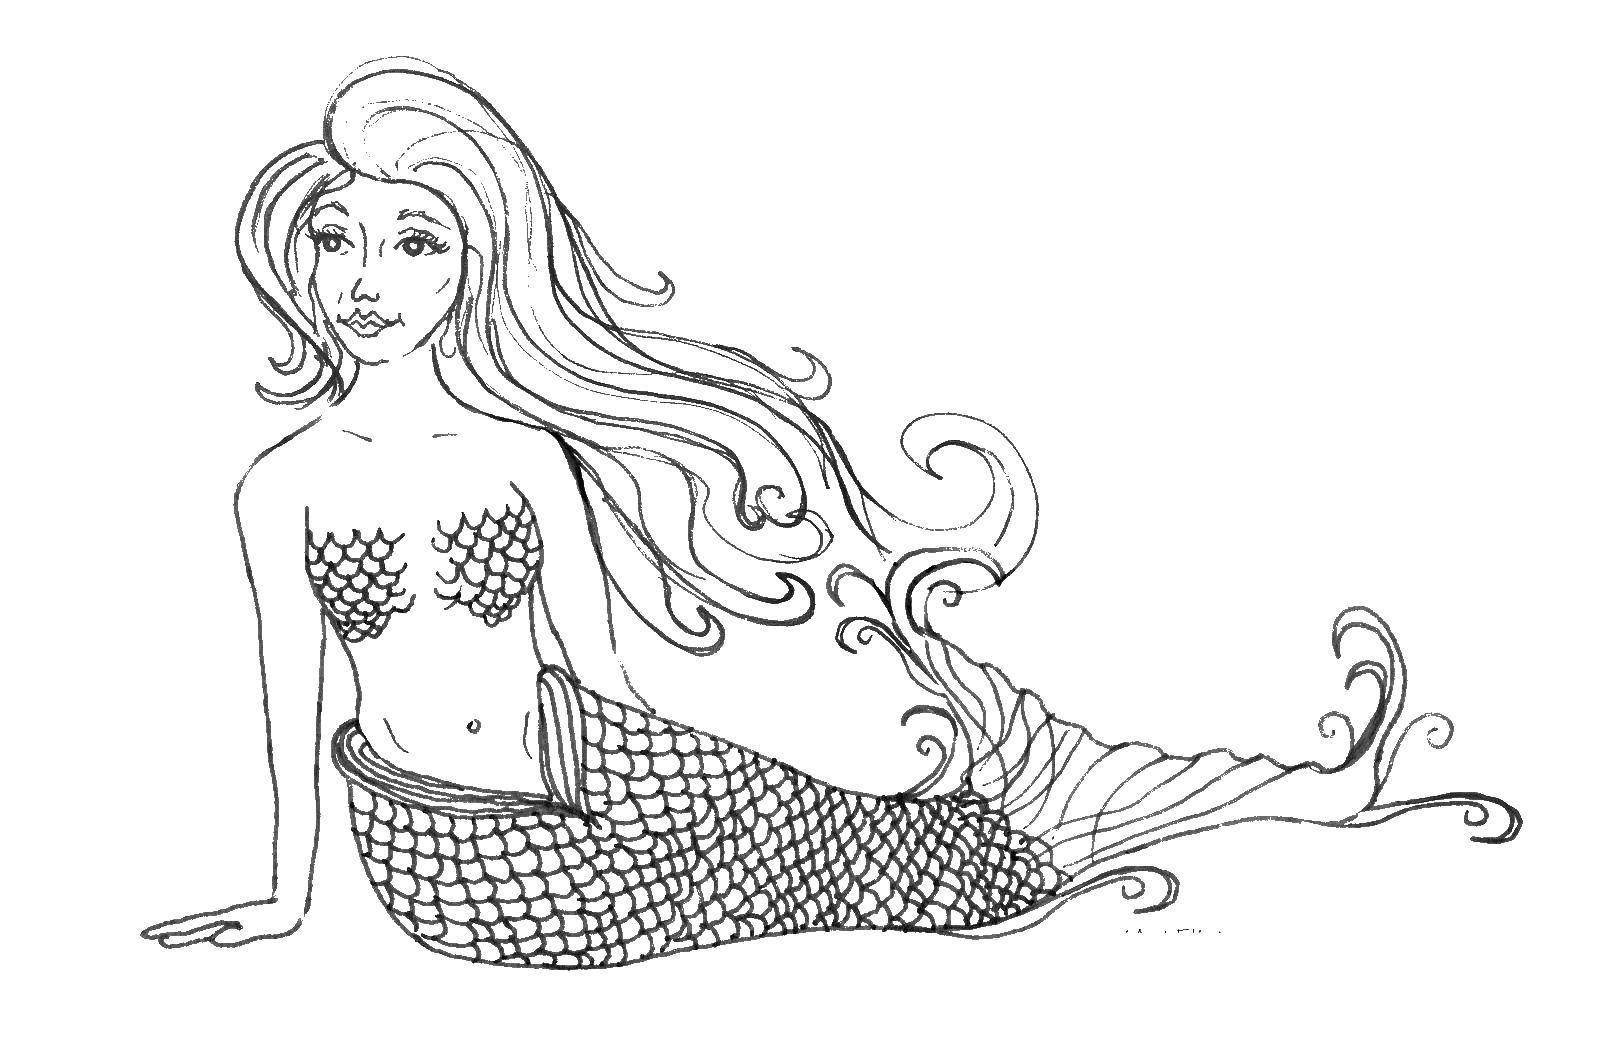 Coloring The little mermaid. Category The little mermaid. Tags:  Mermaid.